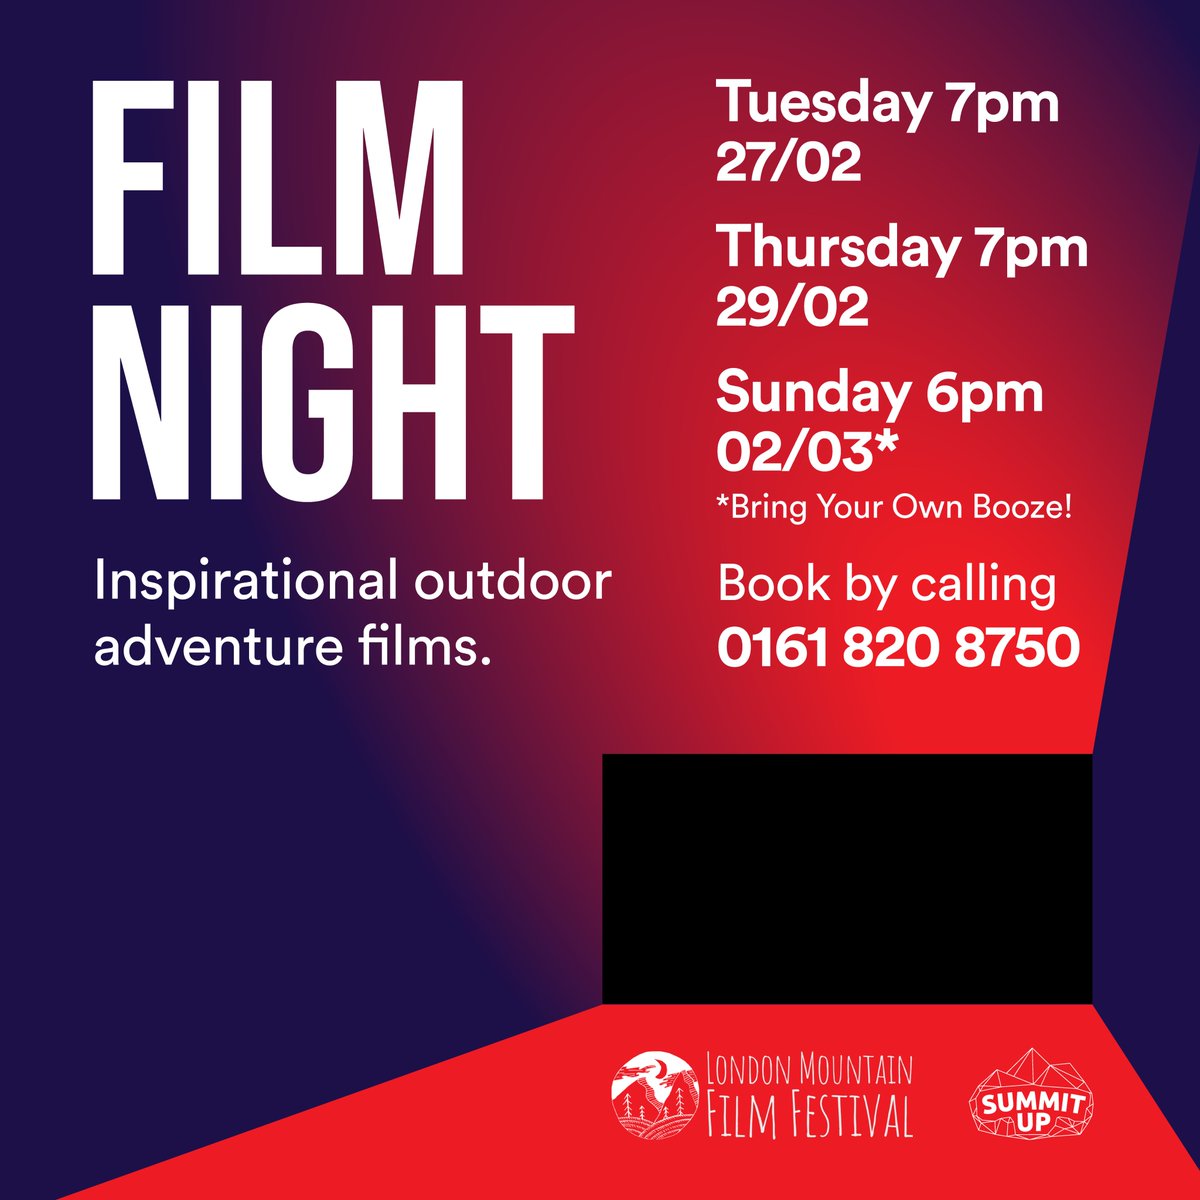 Book your tickets now for our Film Festival nights - brought to you by the @londonmountainfilm 🧗⛰ Tue 27th Feb: 7pm Thu29th Feb: 7pm Sat 2nd Mar: 6pm *Bring your own beers! (Sat only) The cost is £5.50pp and includes free pizza 🍕!